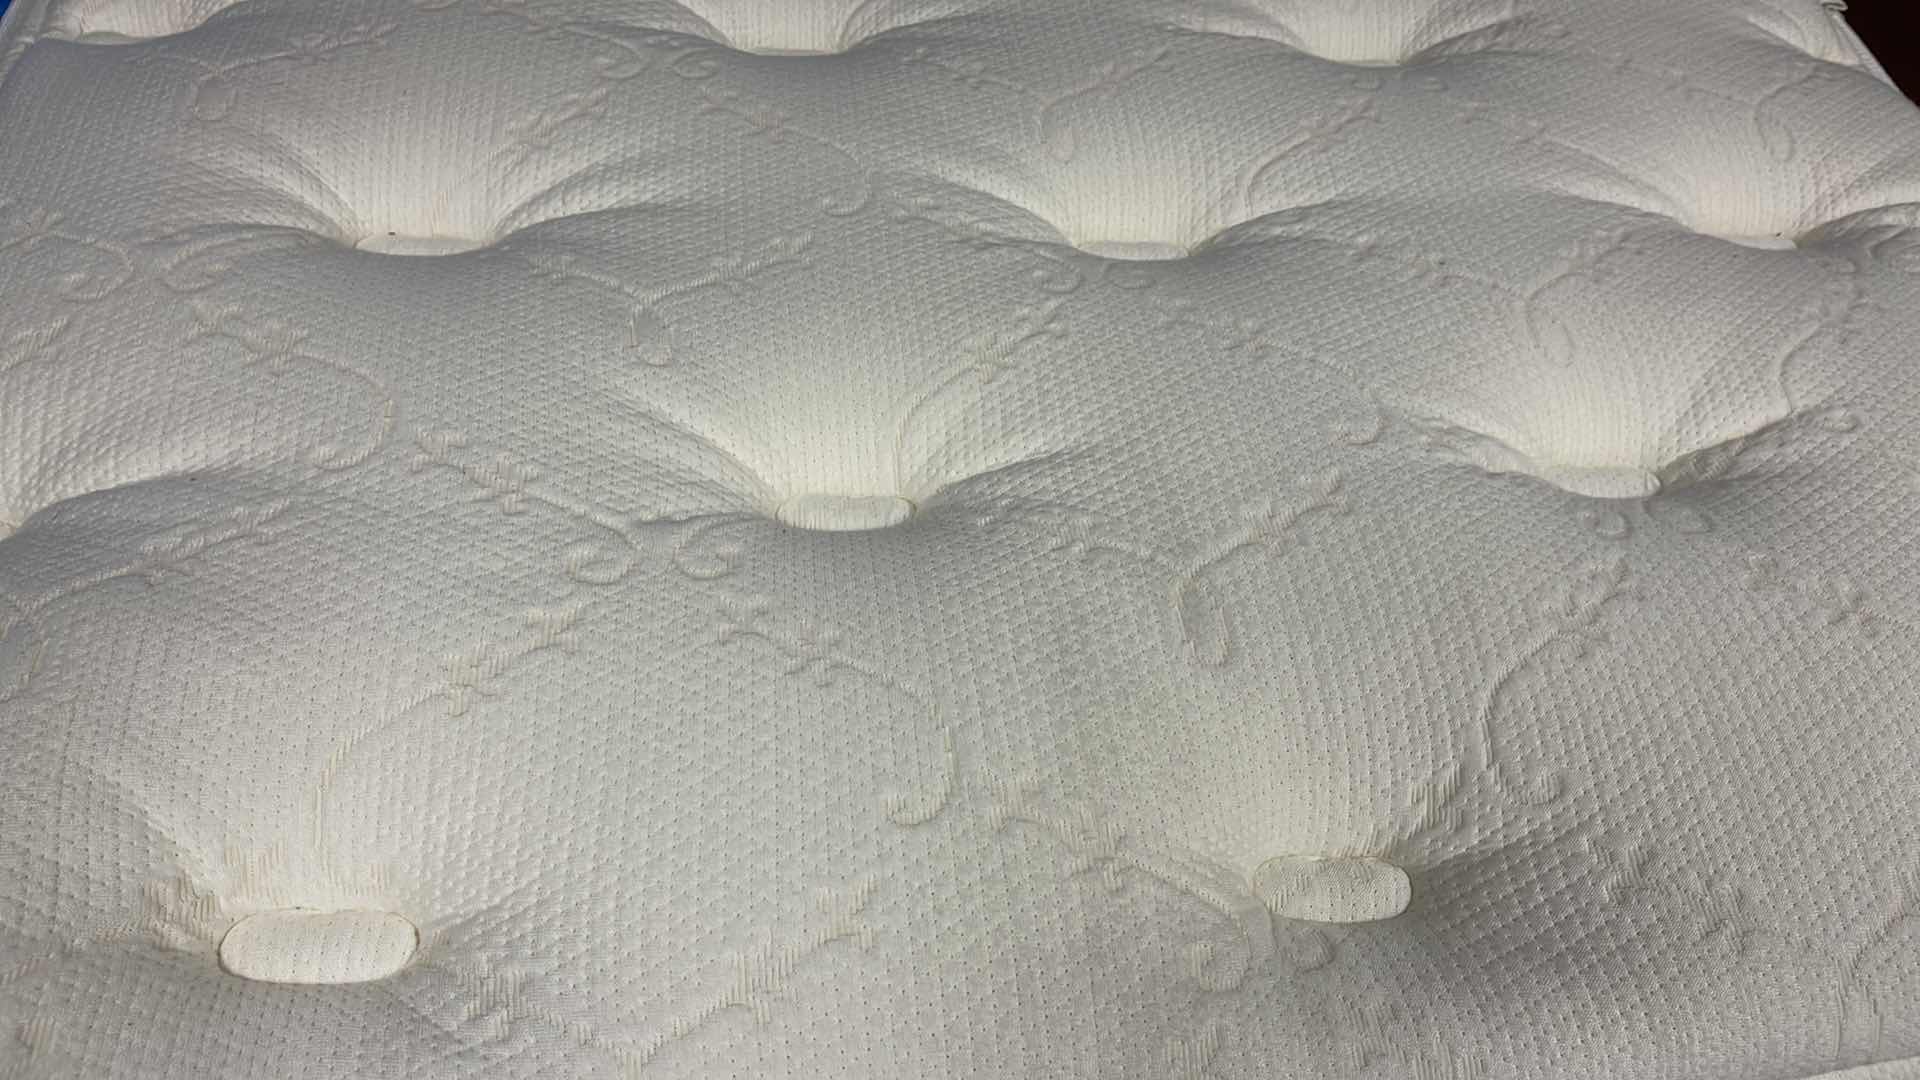 Photo 4 of SIMMONS BEAUTYREST WORLD CLASS MATTRESS WAS FACTORY SEALED BEFORE PICTURES(BED SOLD SEPARATELY)